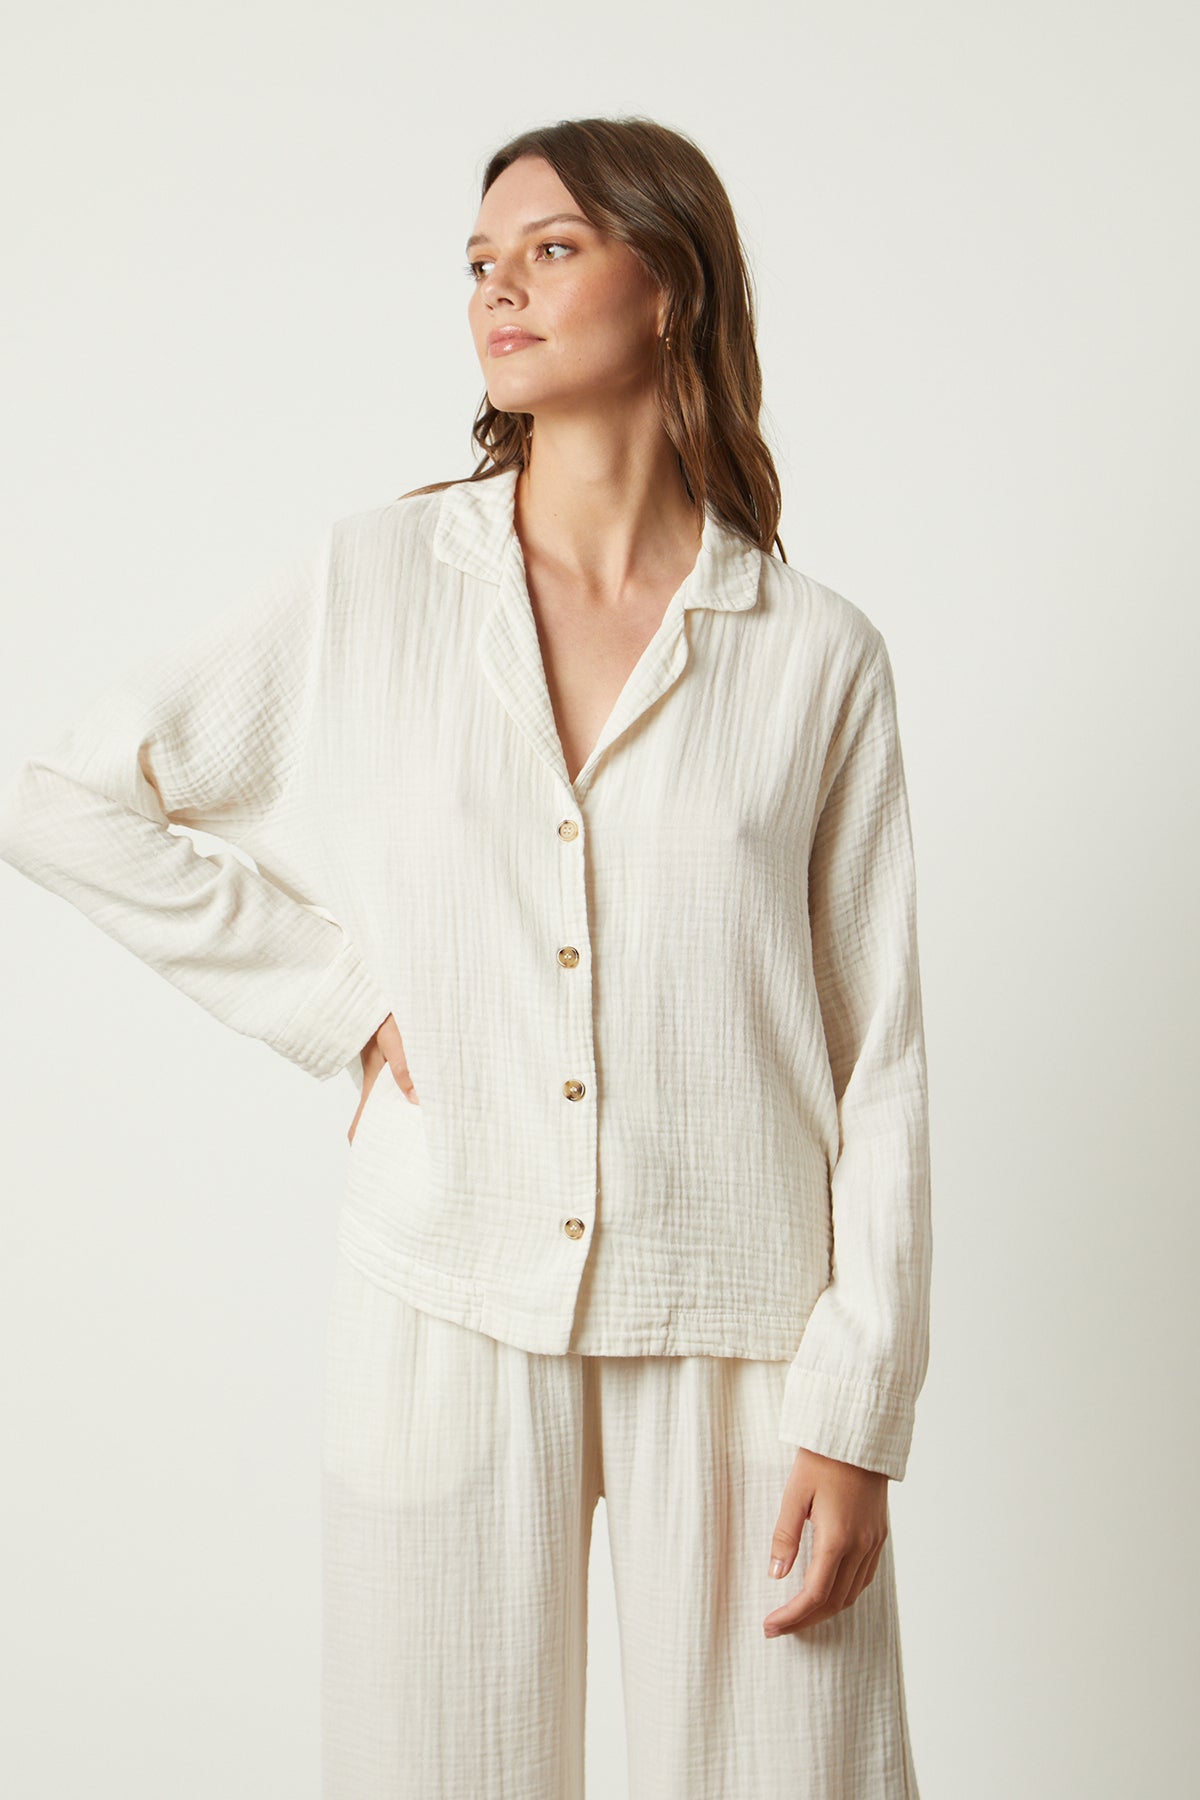 The model is wearing a white Jenny Graham Home pyjama shirt and pants.-25519547842753